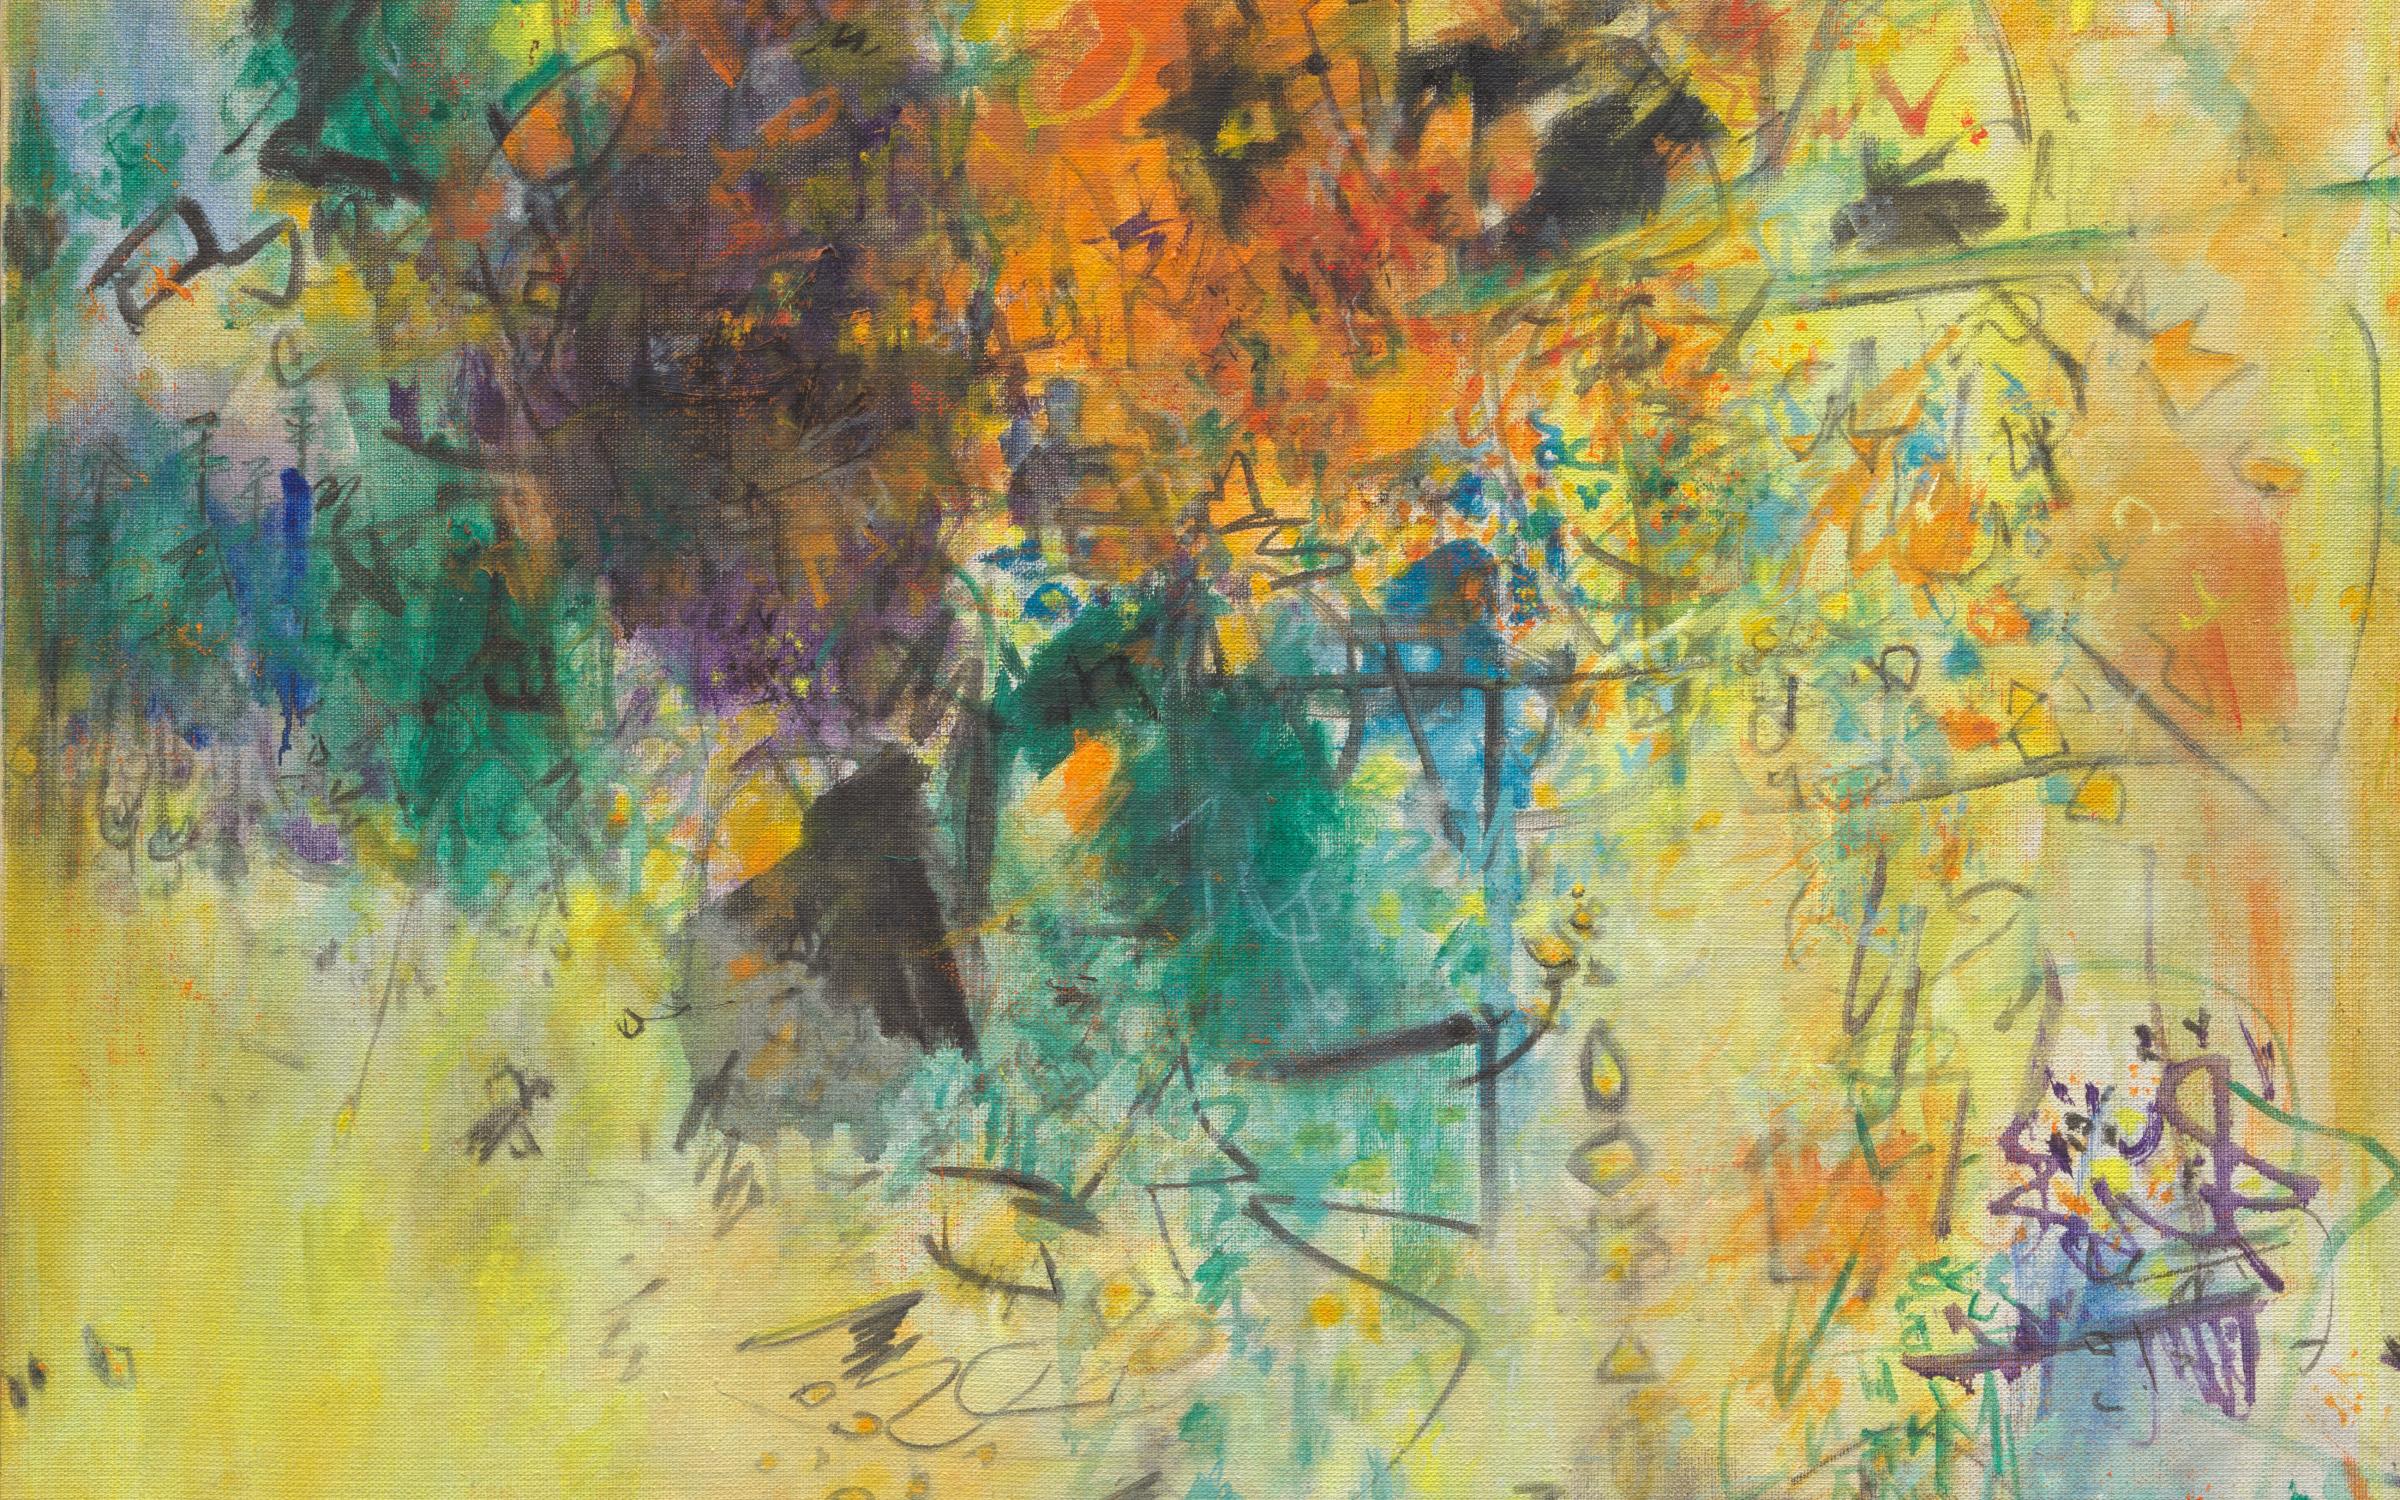 A colorful, abstract painting of splotches of blue, purple, orange and yellow. There are dark scribbles all over the canvas as well.